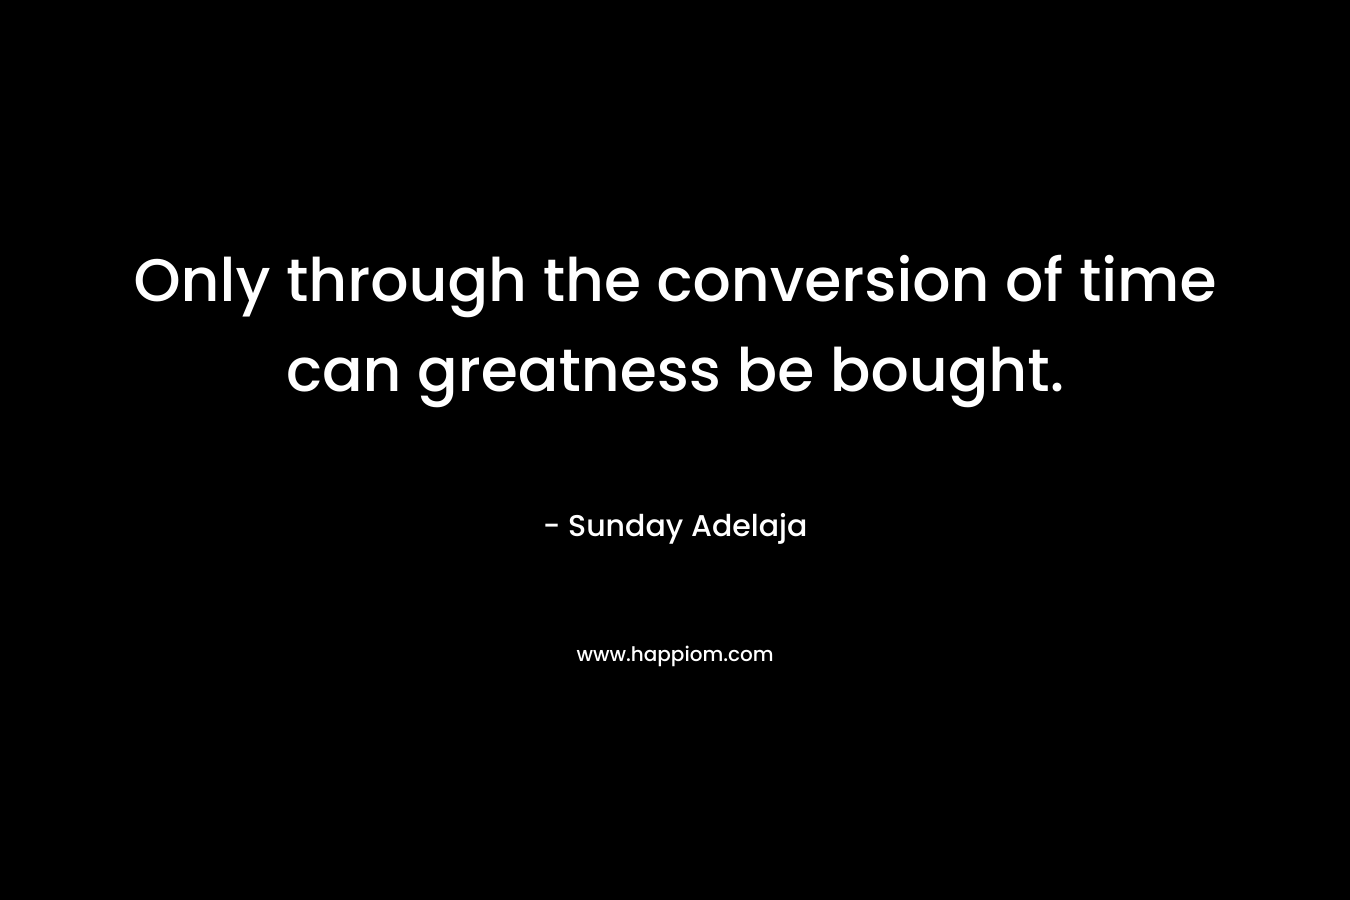 Only through the conversion of time can greatness be bought.